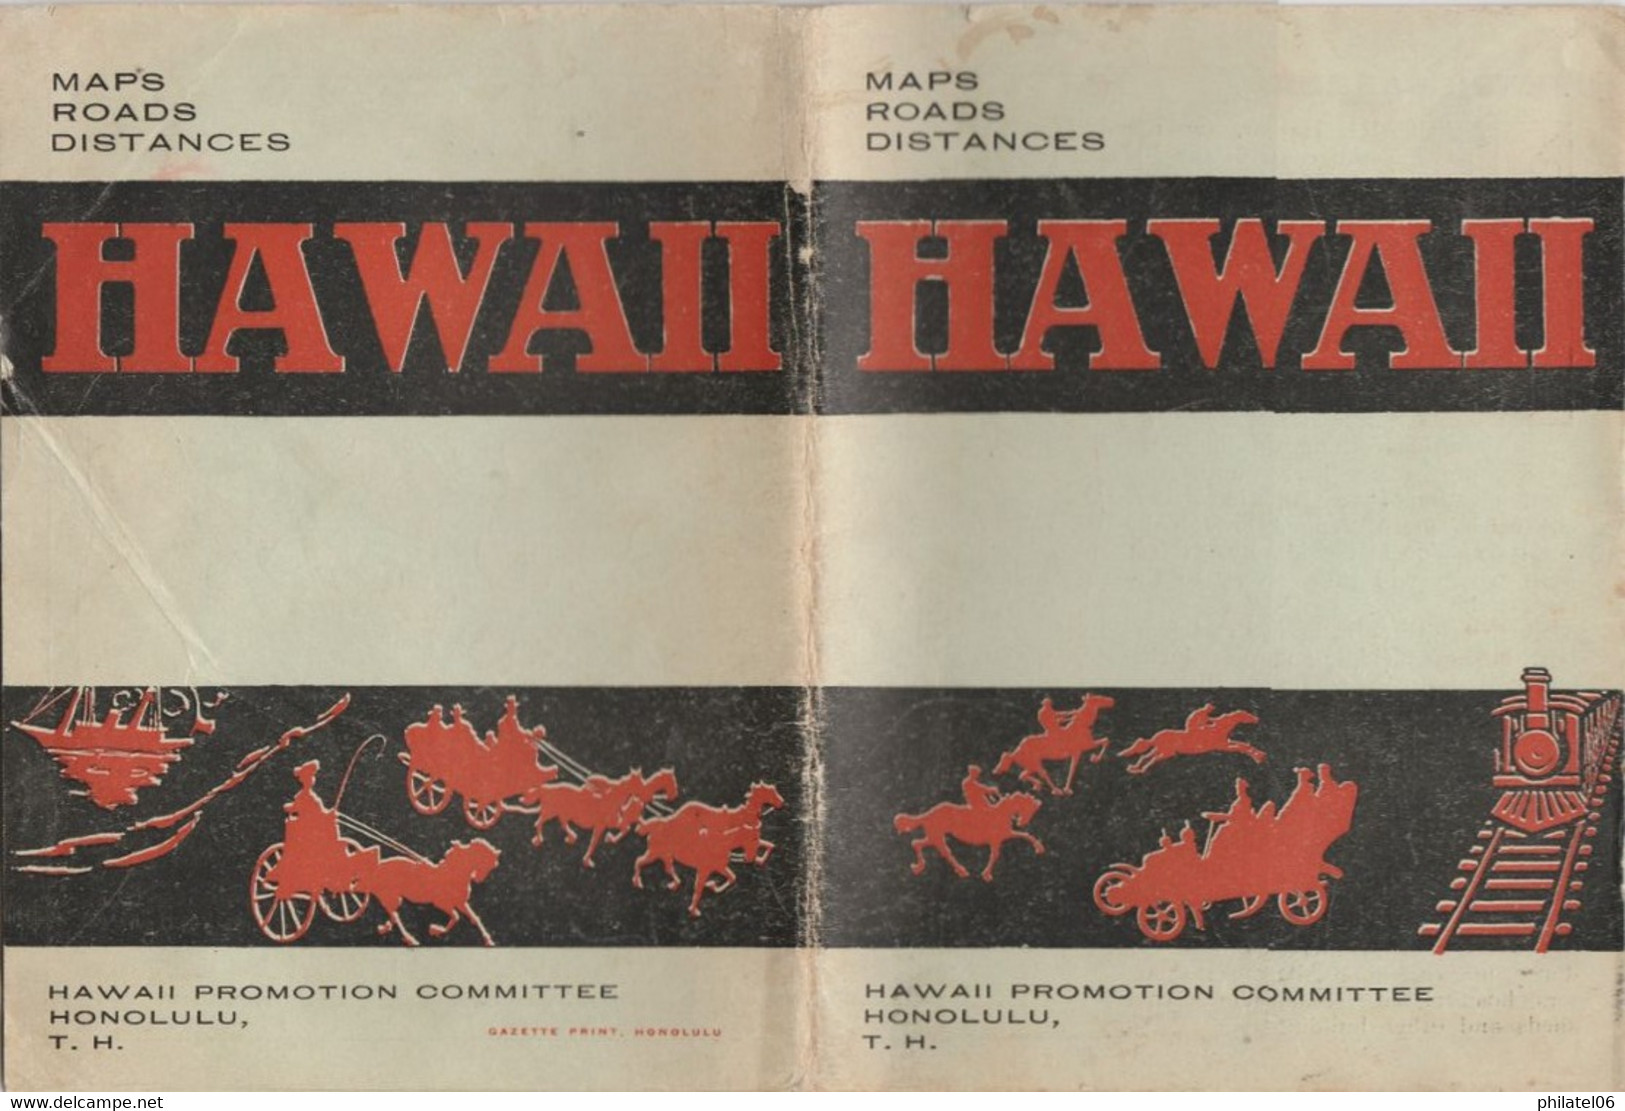 GUIDE HAWAI (USA)  16 PAGES ILLUSTREES  NOMBREUSES CARTES - North America